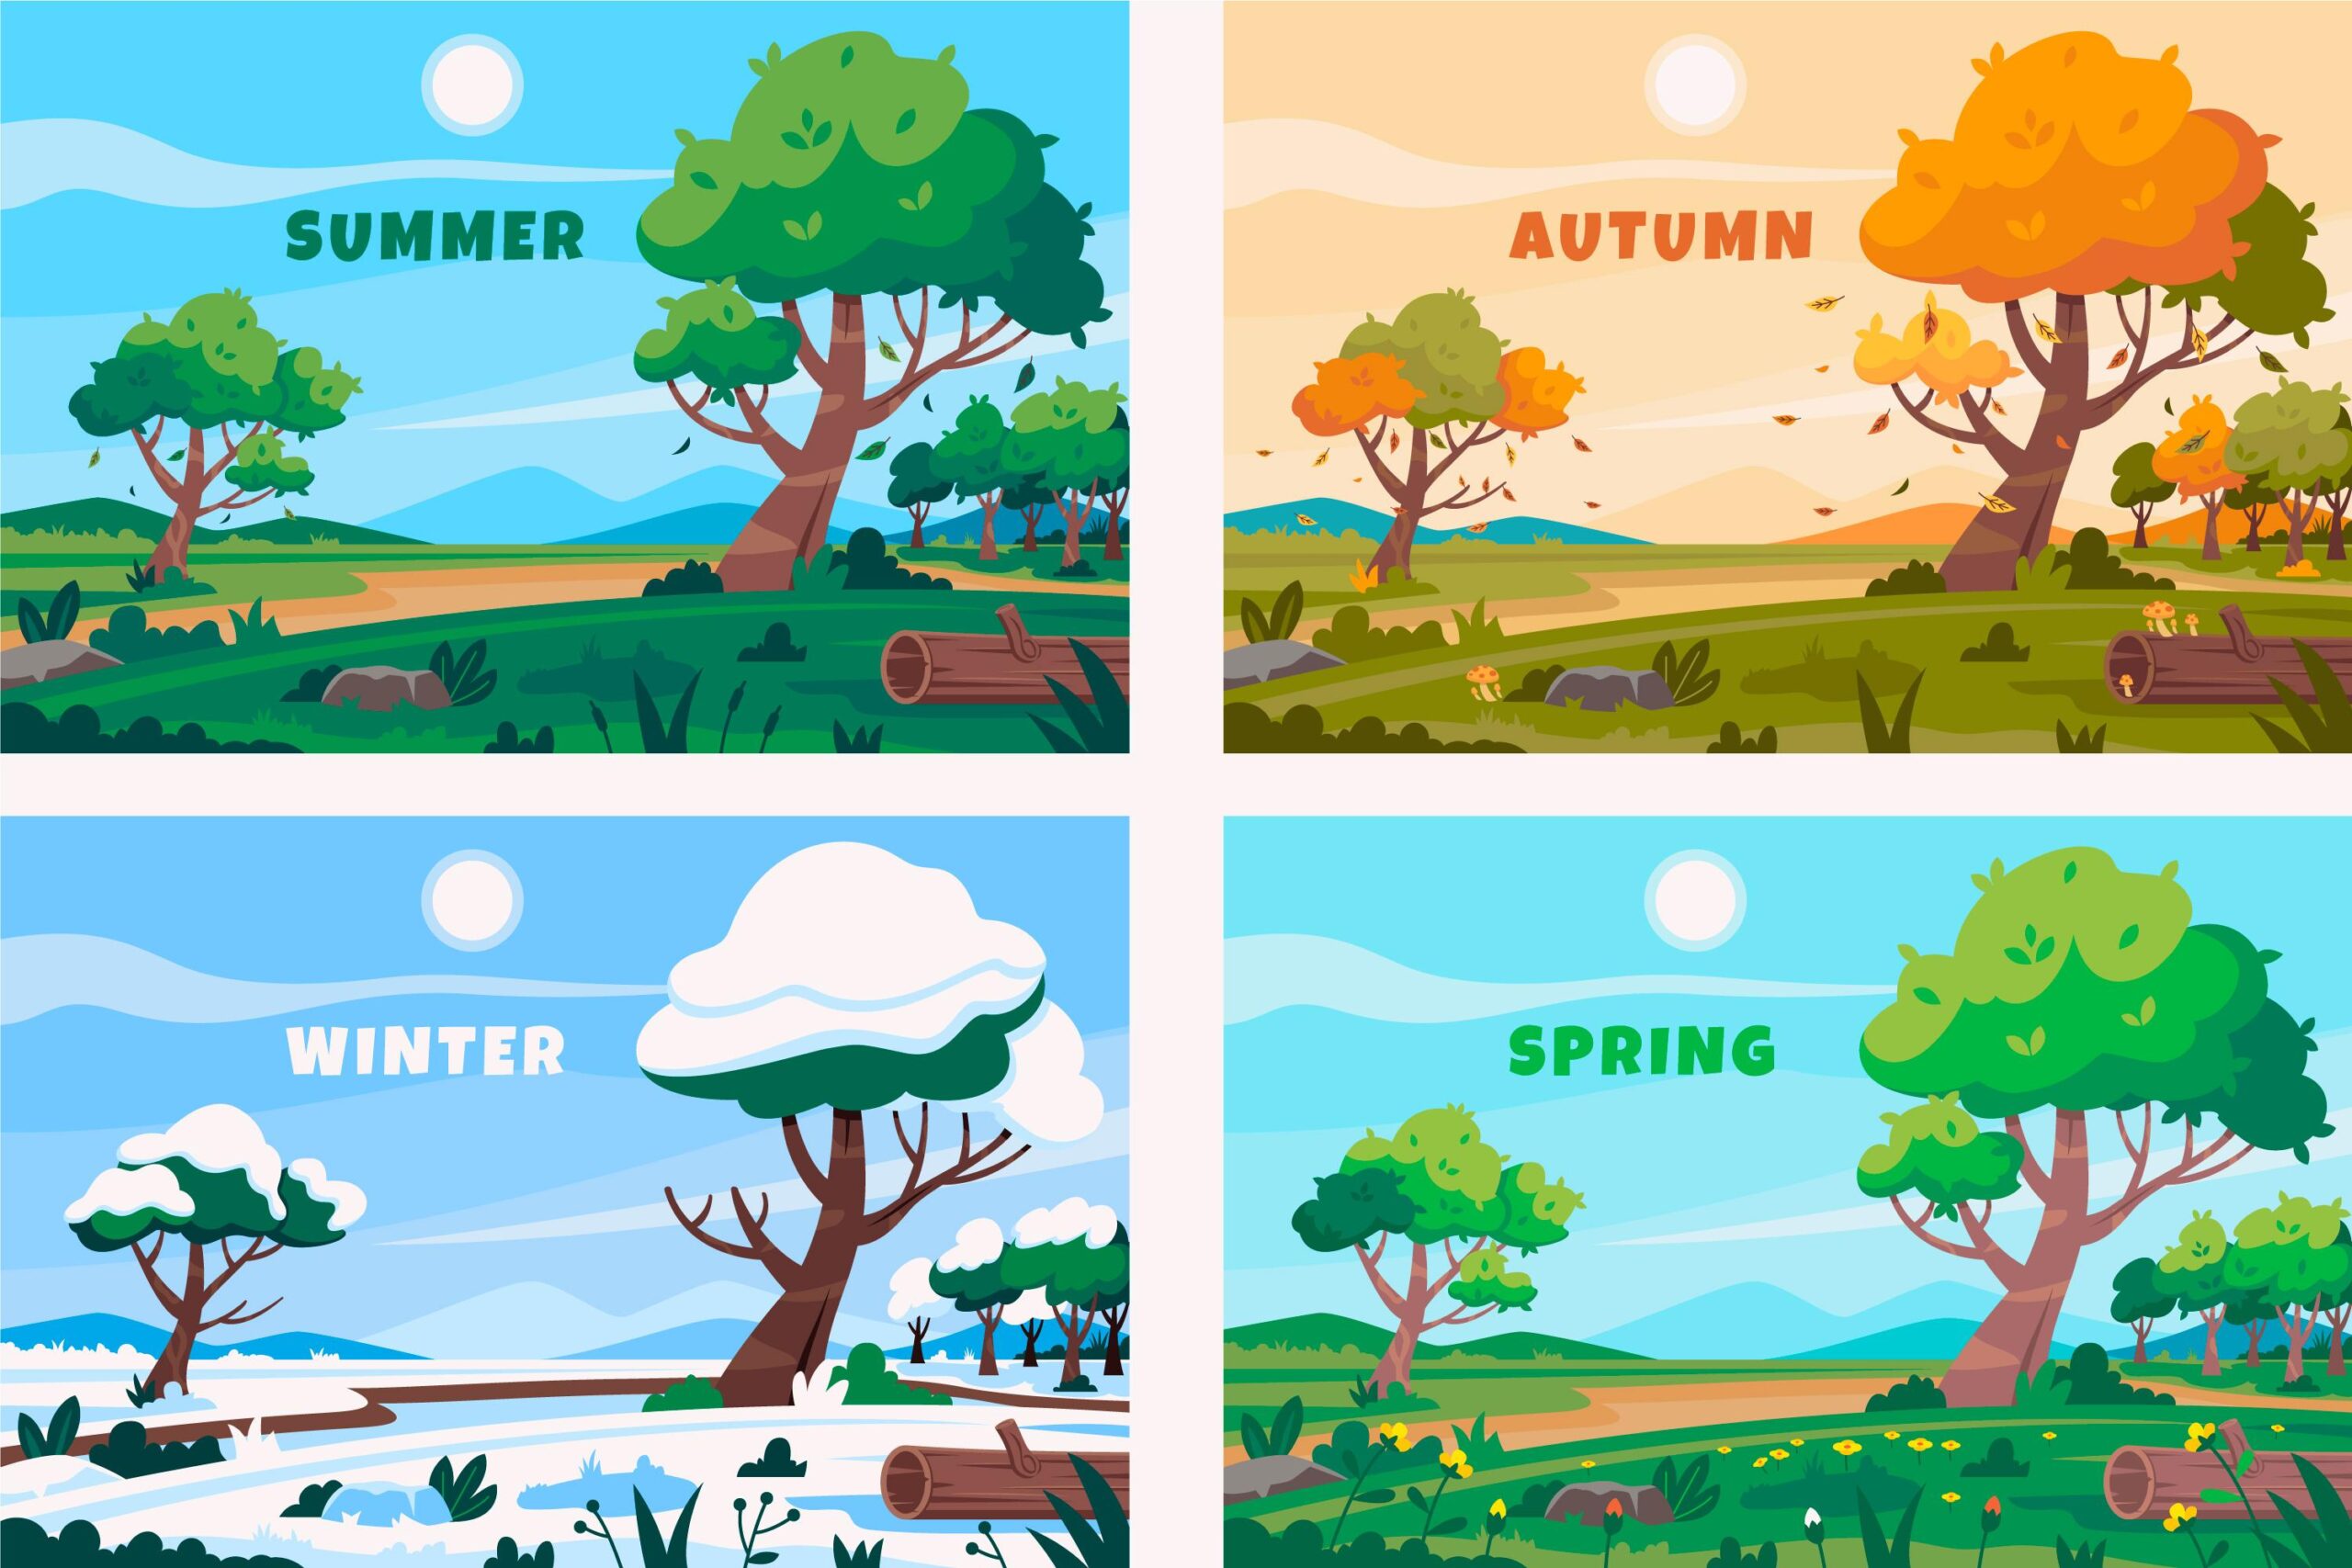 different-types-of-seasons-in-india-travellersofindia.com